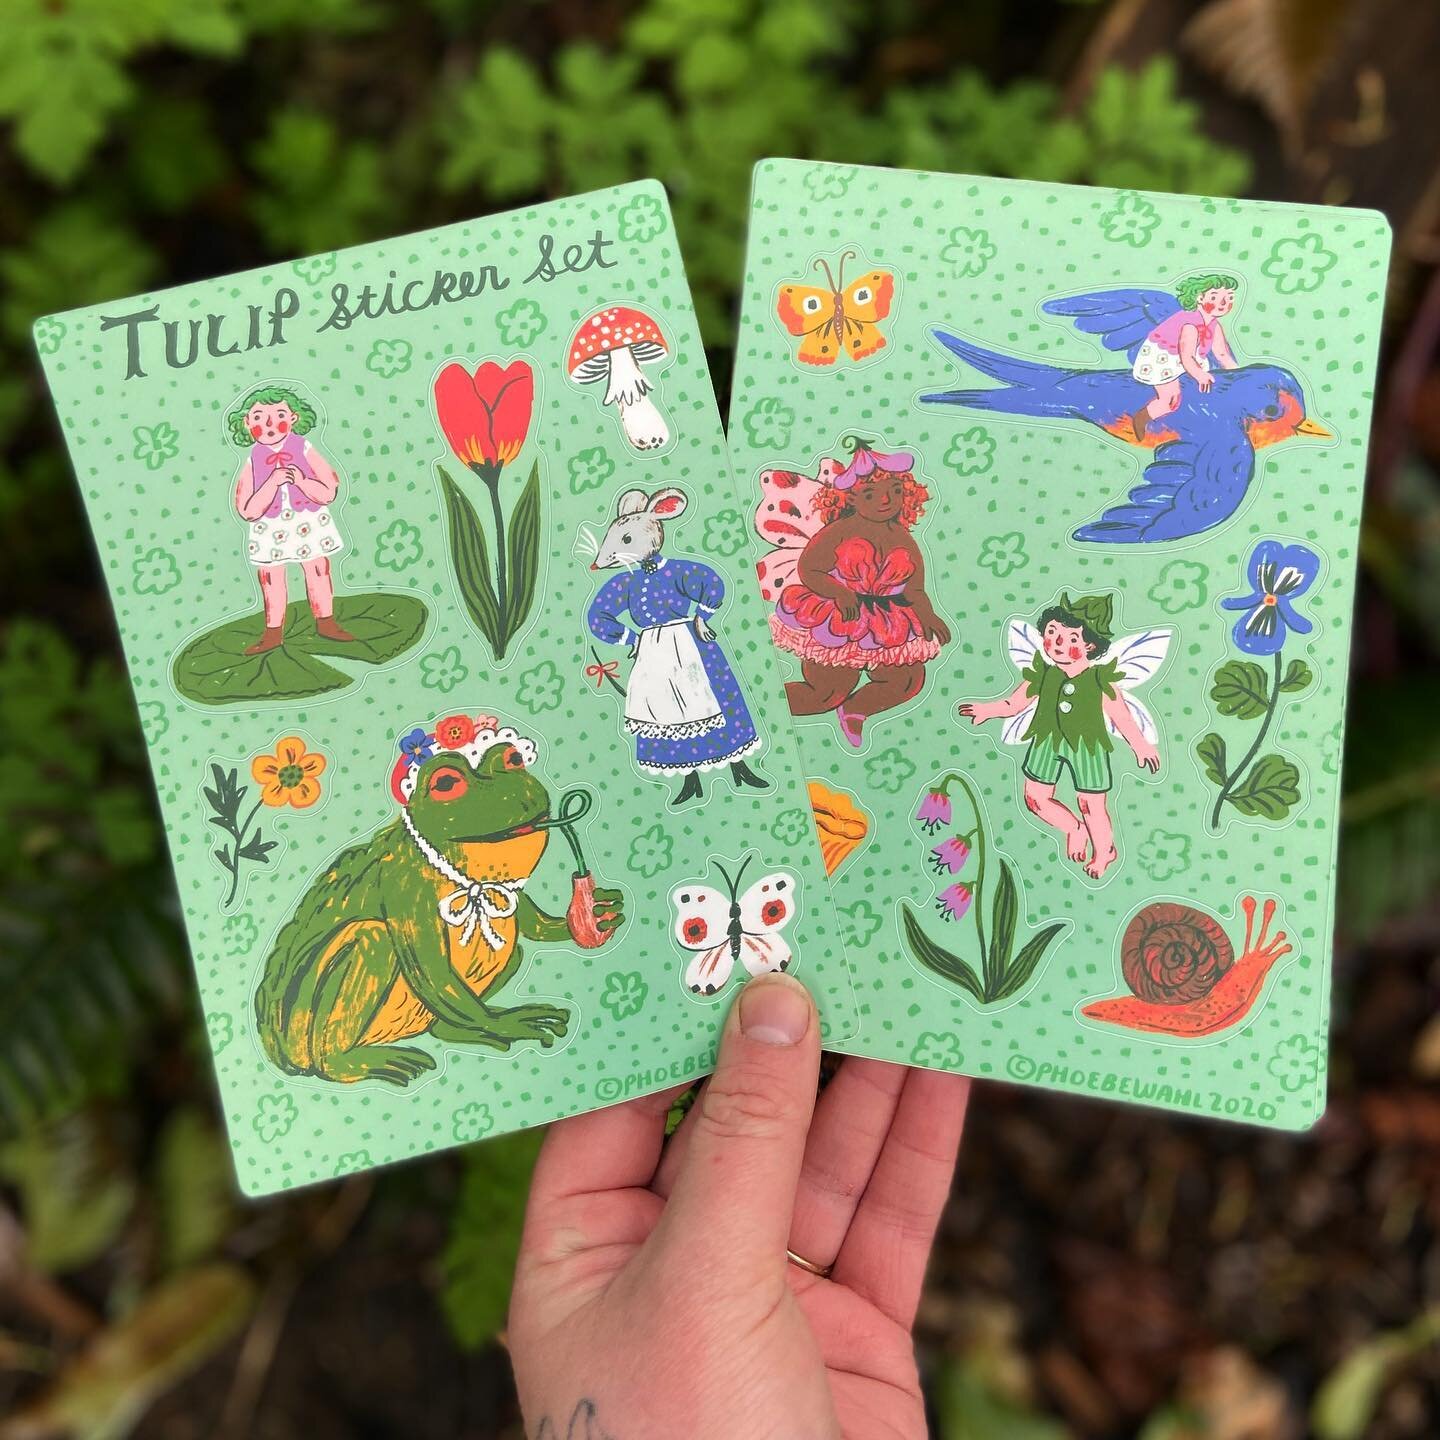 ATTN. Kickstarter backers: we are sending out surveys to collect shipping information soon, so keep an eye out in your inbox! Some of your gorgeous incentives have already started rolling in, like these beautiful sticker sets! However, due to the COV